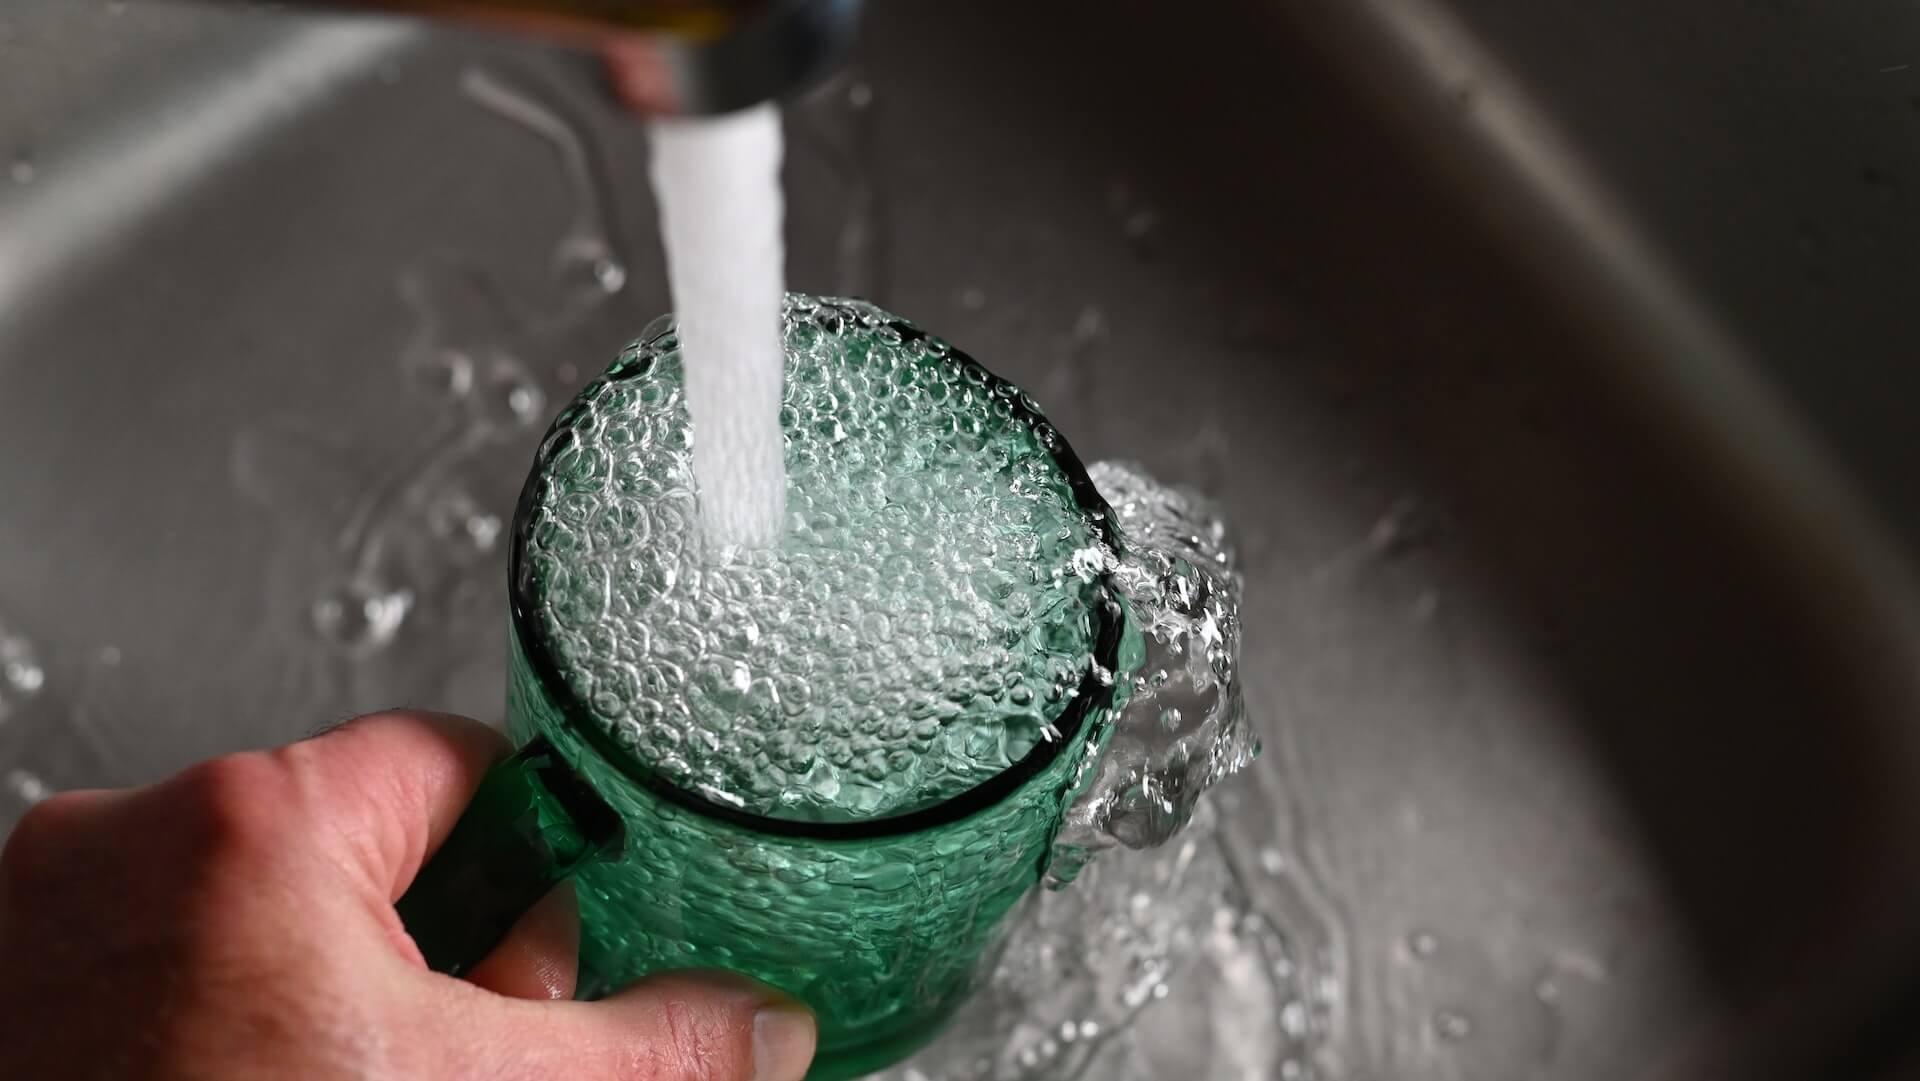 Tap water filling a glass